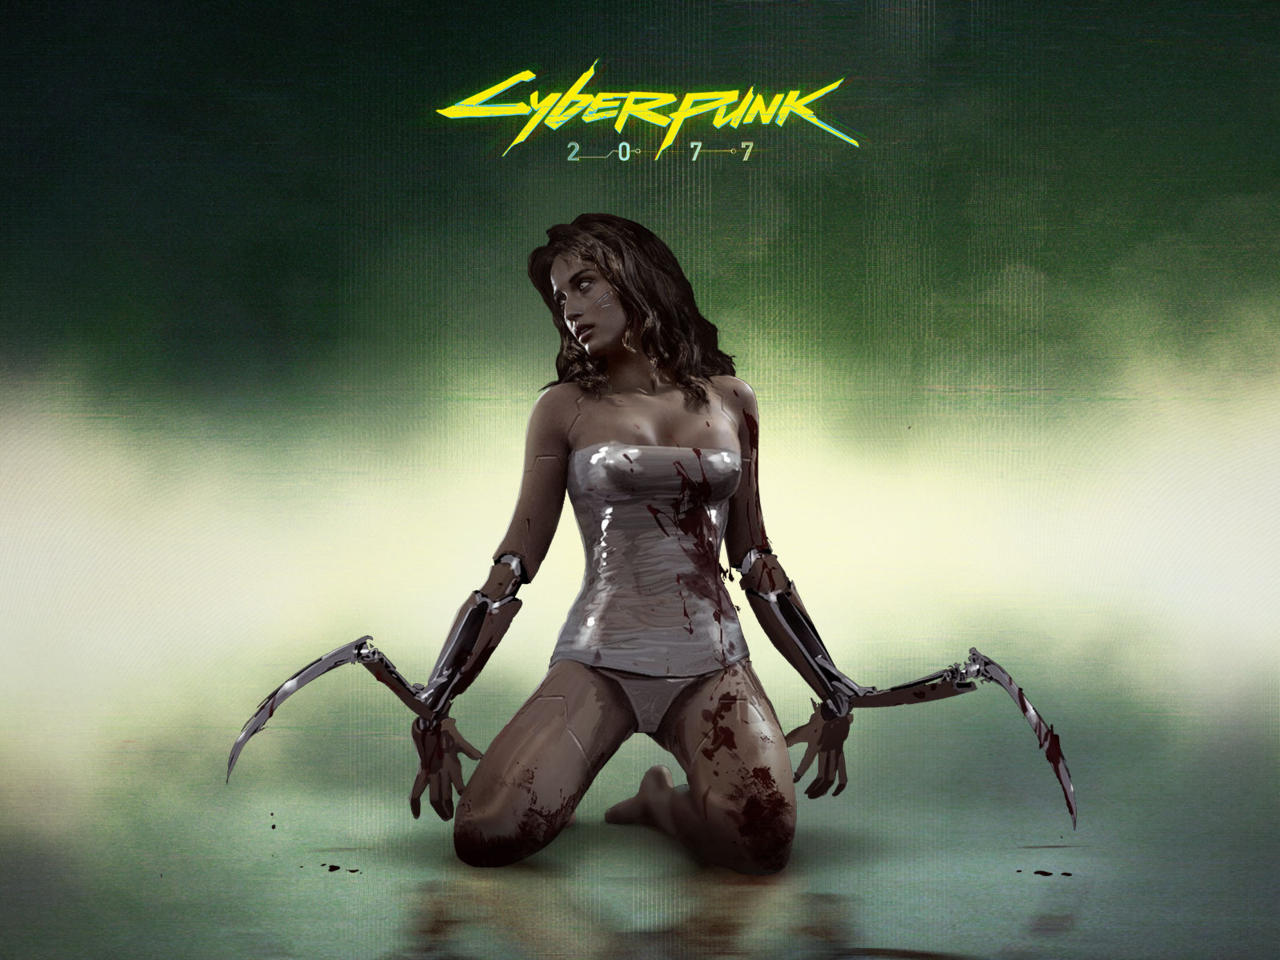 2) We Will See Gameplay Footage of Cyberpunk 2077